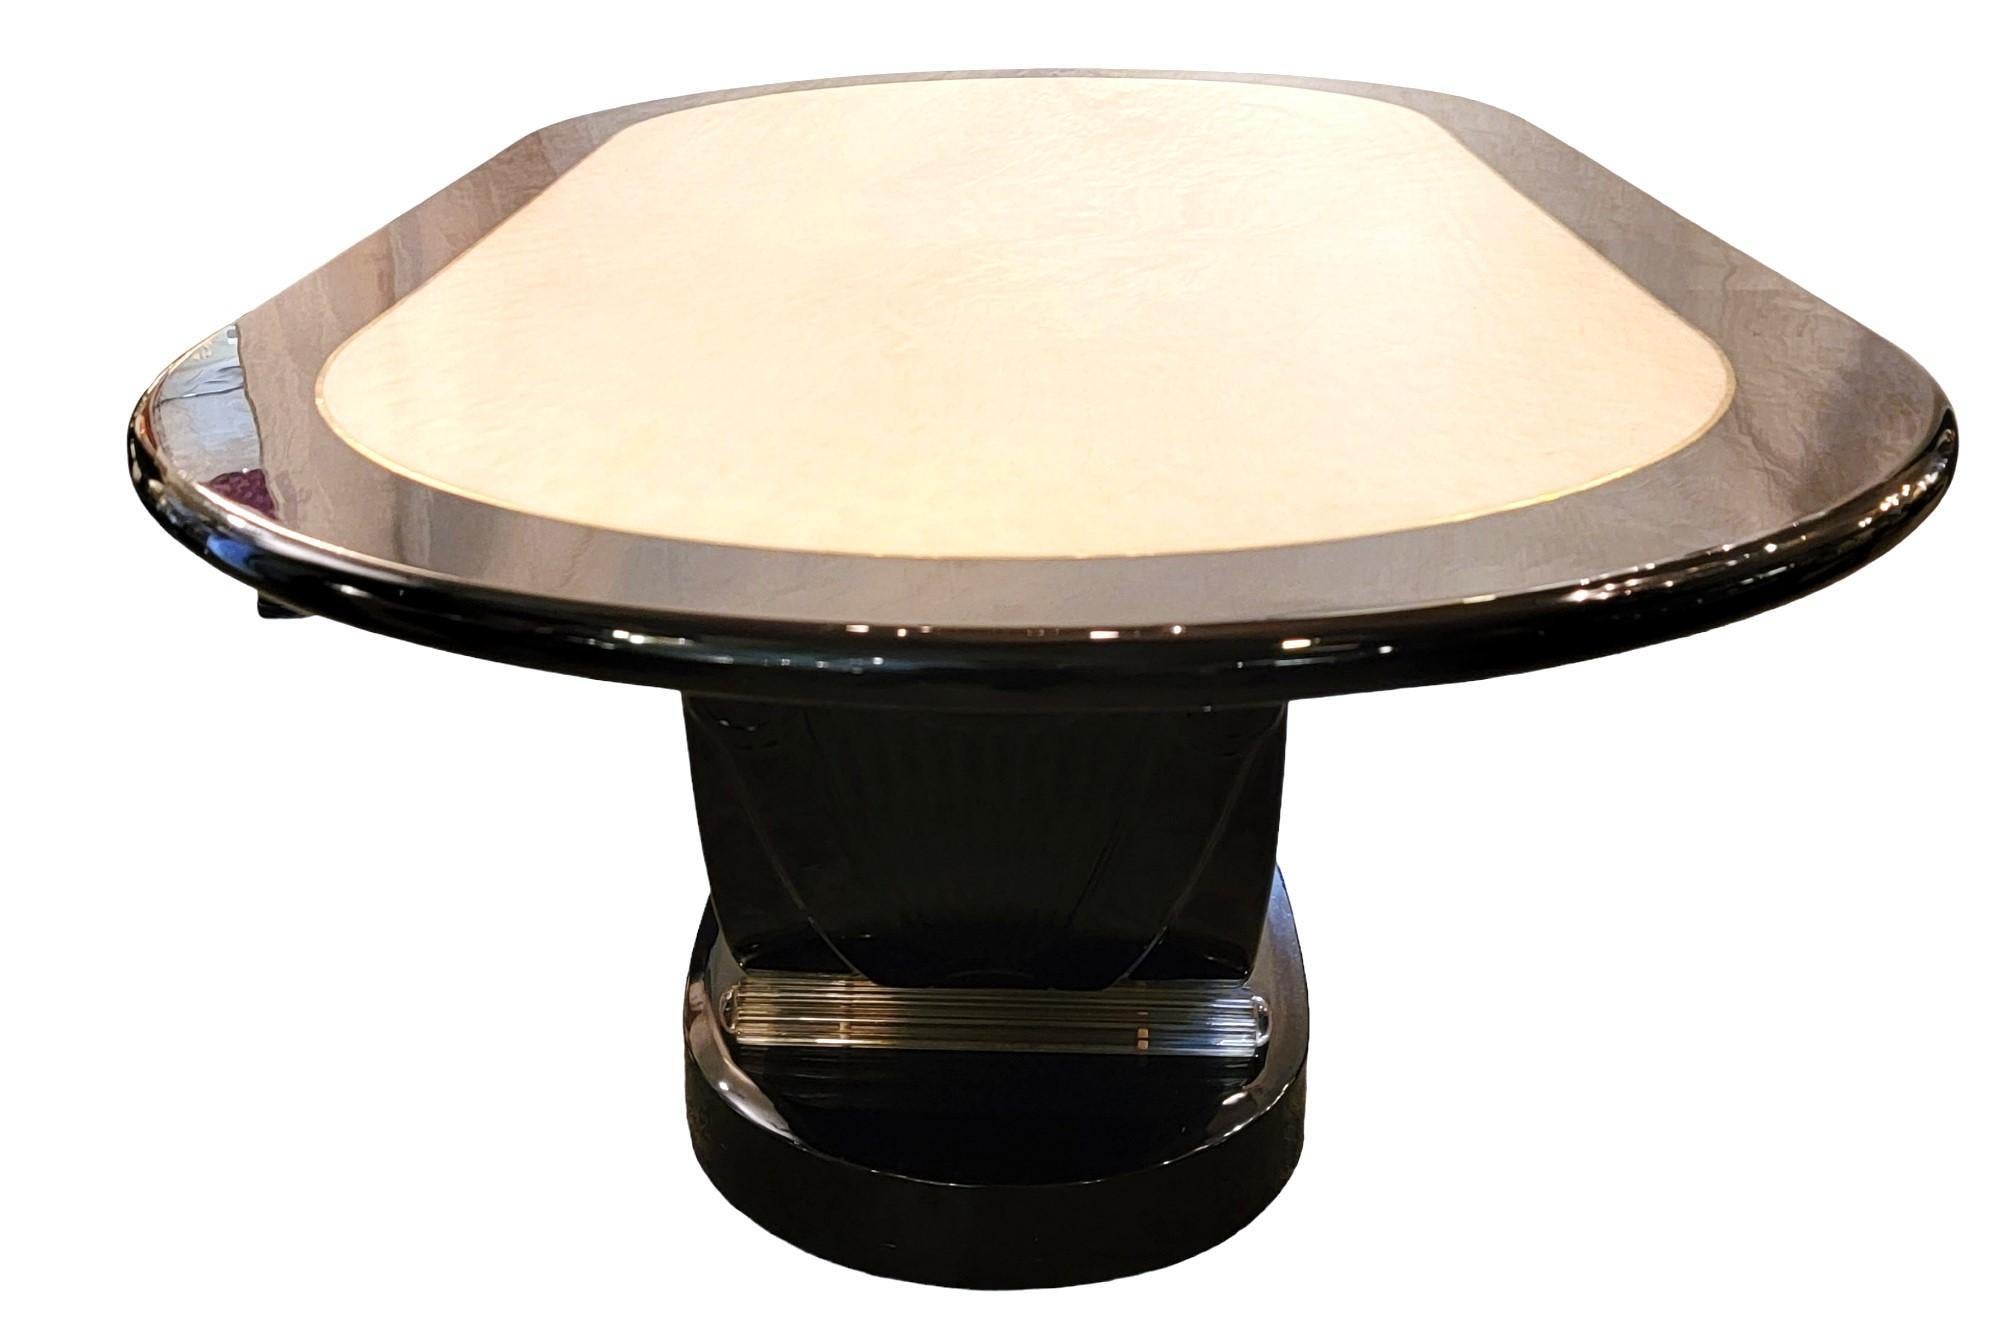 Oval wood lacquer and Lucite conference table.
The top of the table offers a white and black lacquered top. The top of the table has a feathered peacock design which offers a wonderful sense of relaxation. The white is contrasted throughout the